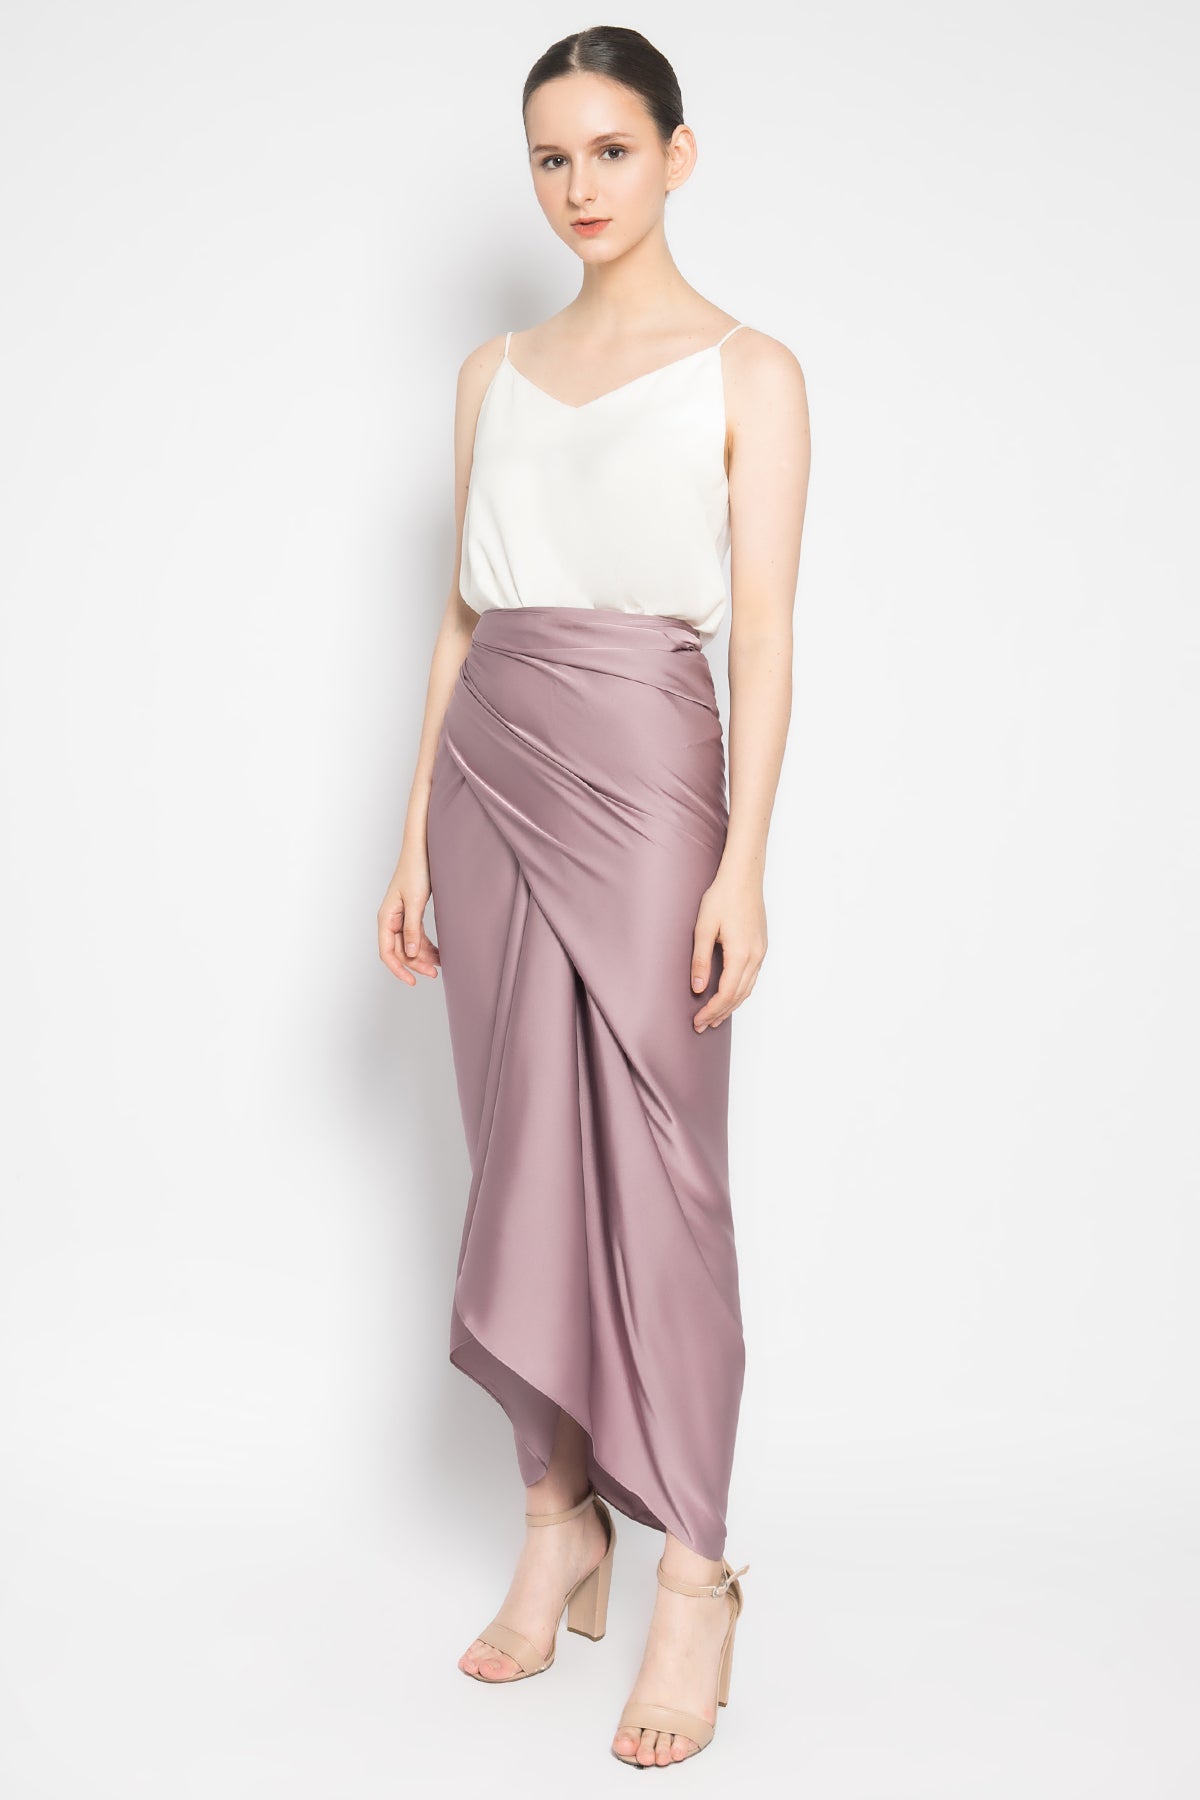 Aisyah Lilit Skirt in Lilac